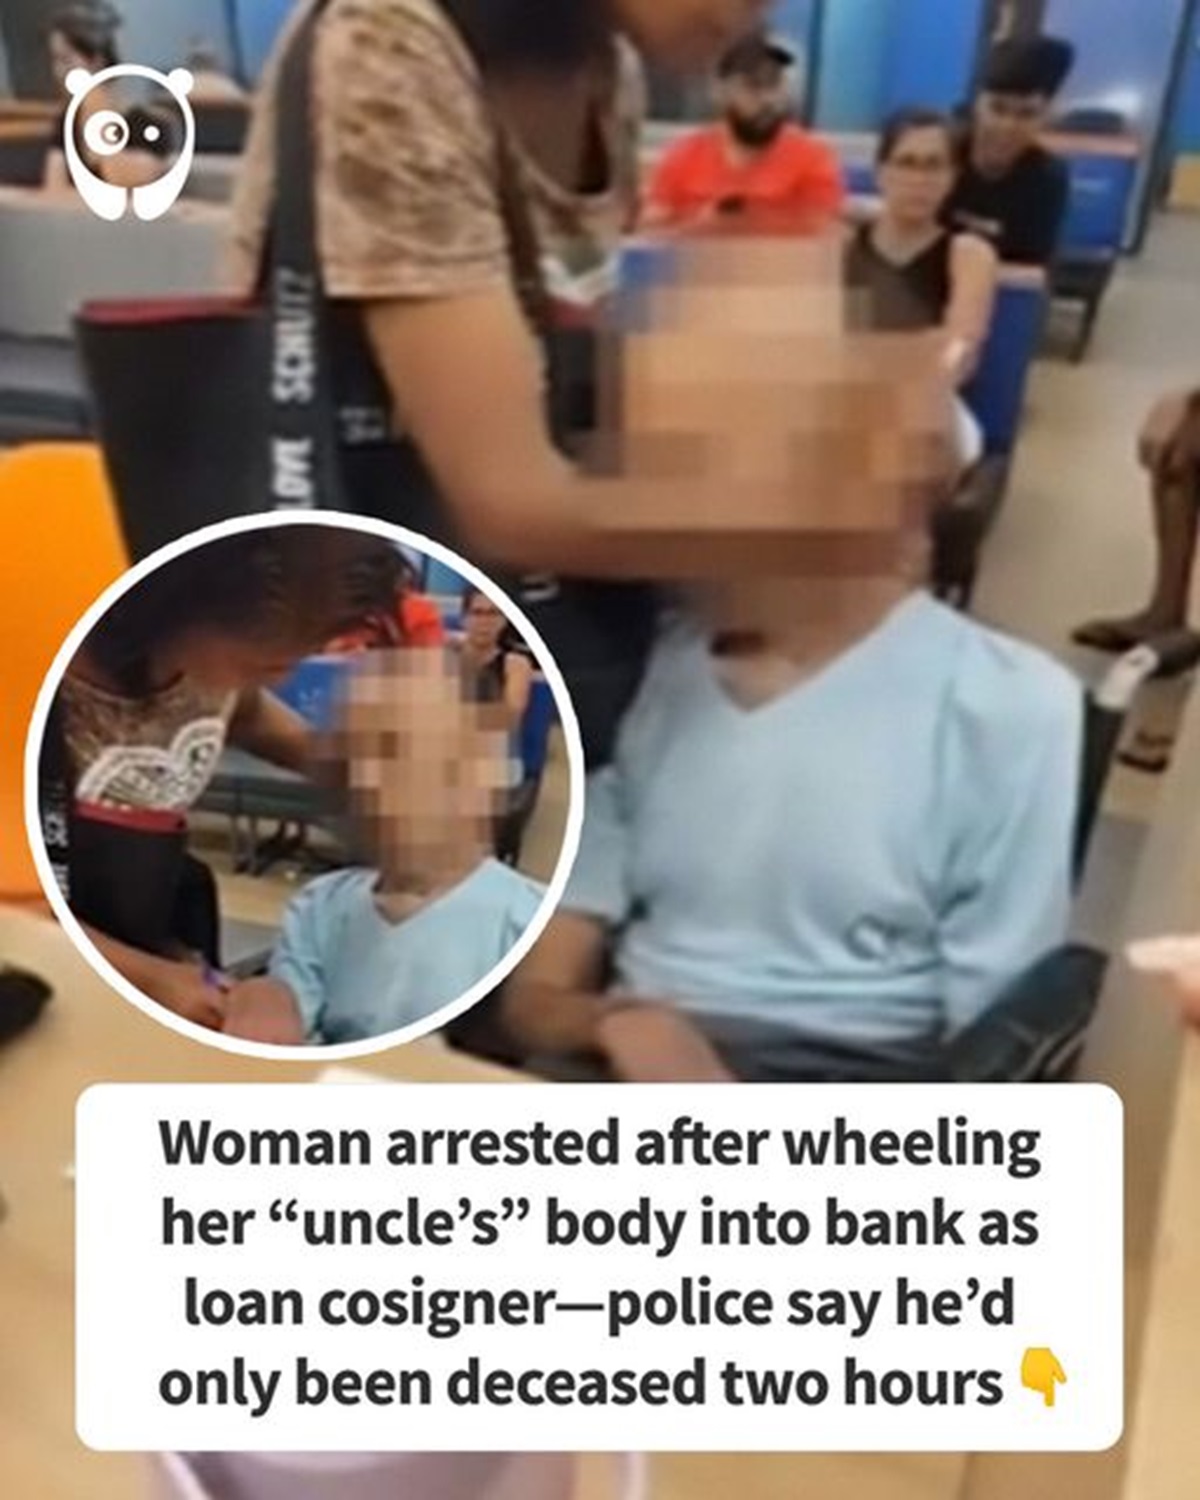 Loan - Woman arrested after wheeling her "uncle's" body into bank as loan cosignerpolice say he'd only been deceased two hours